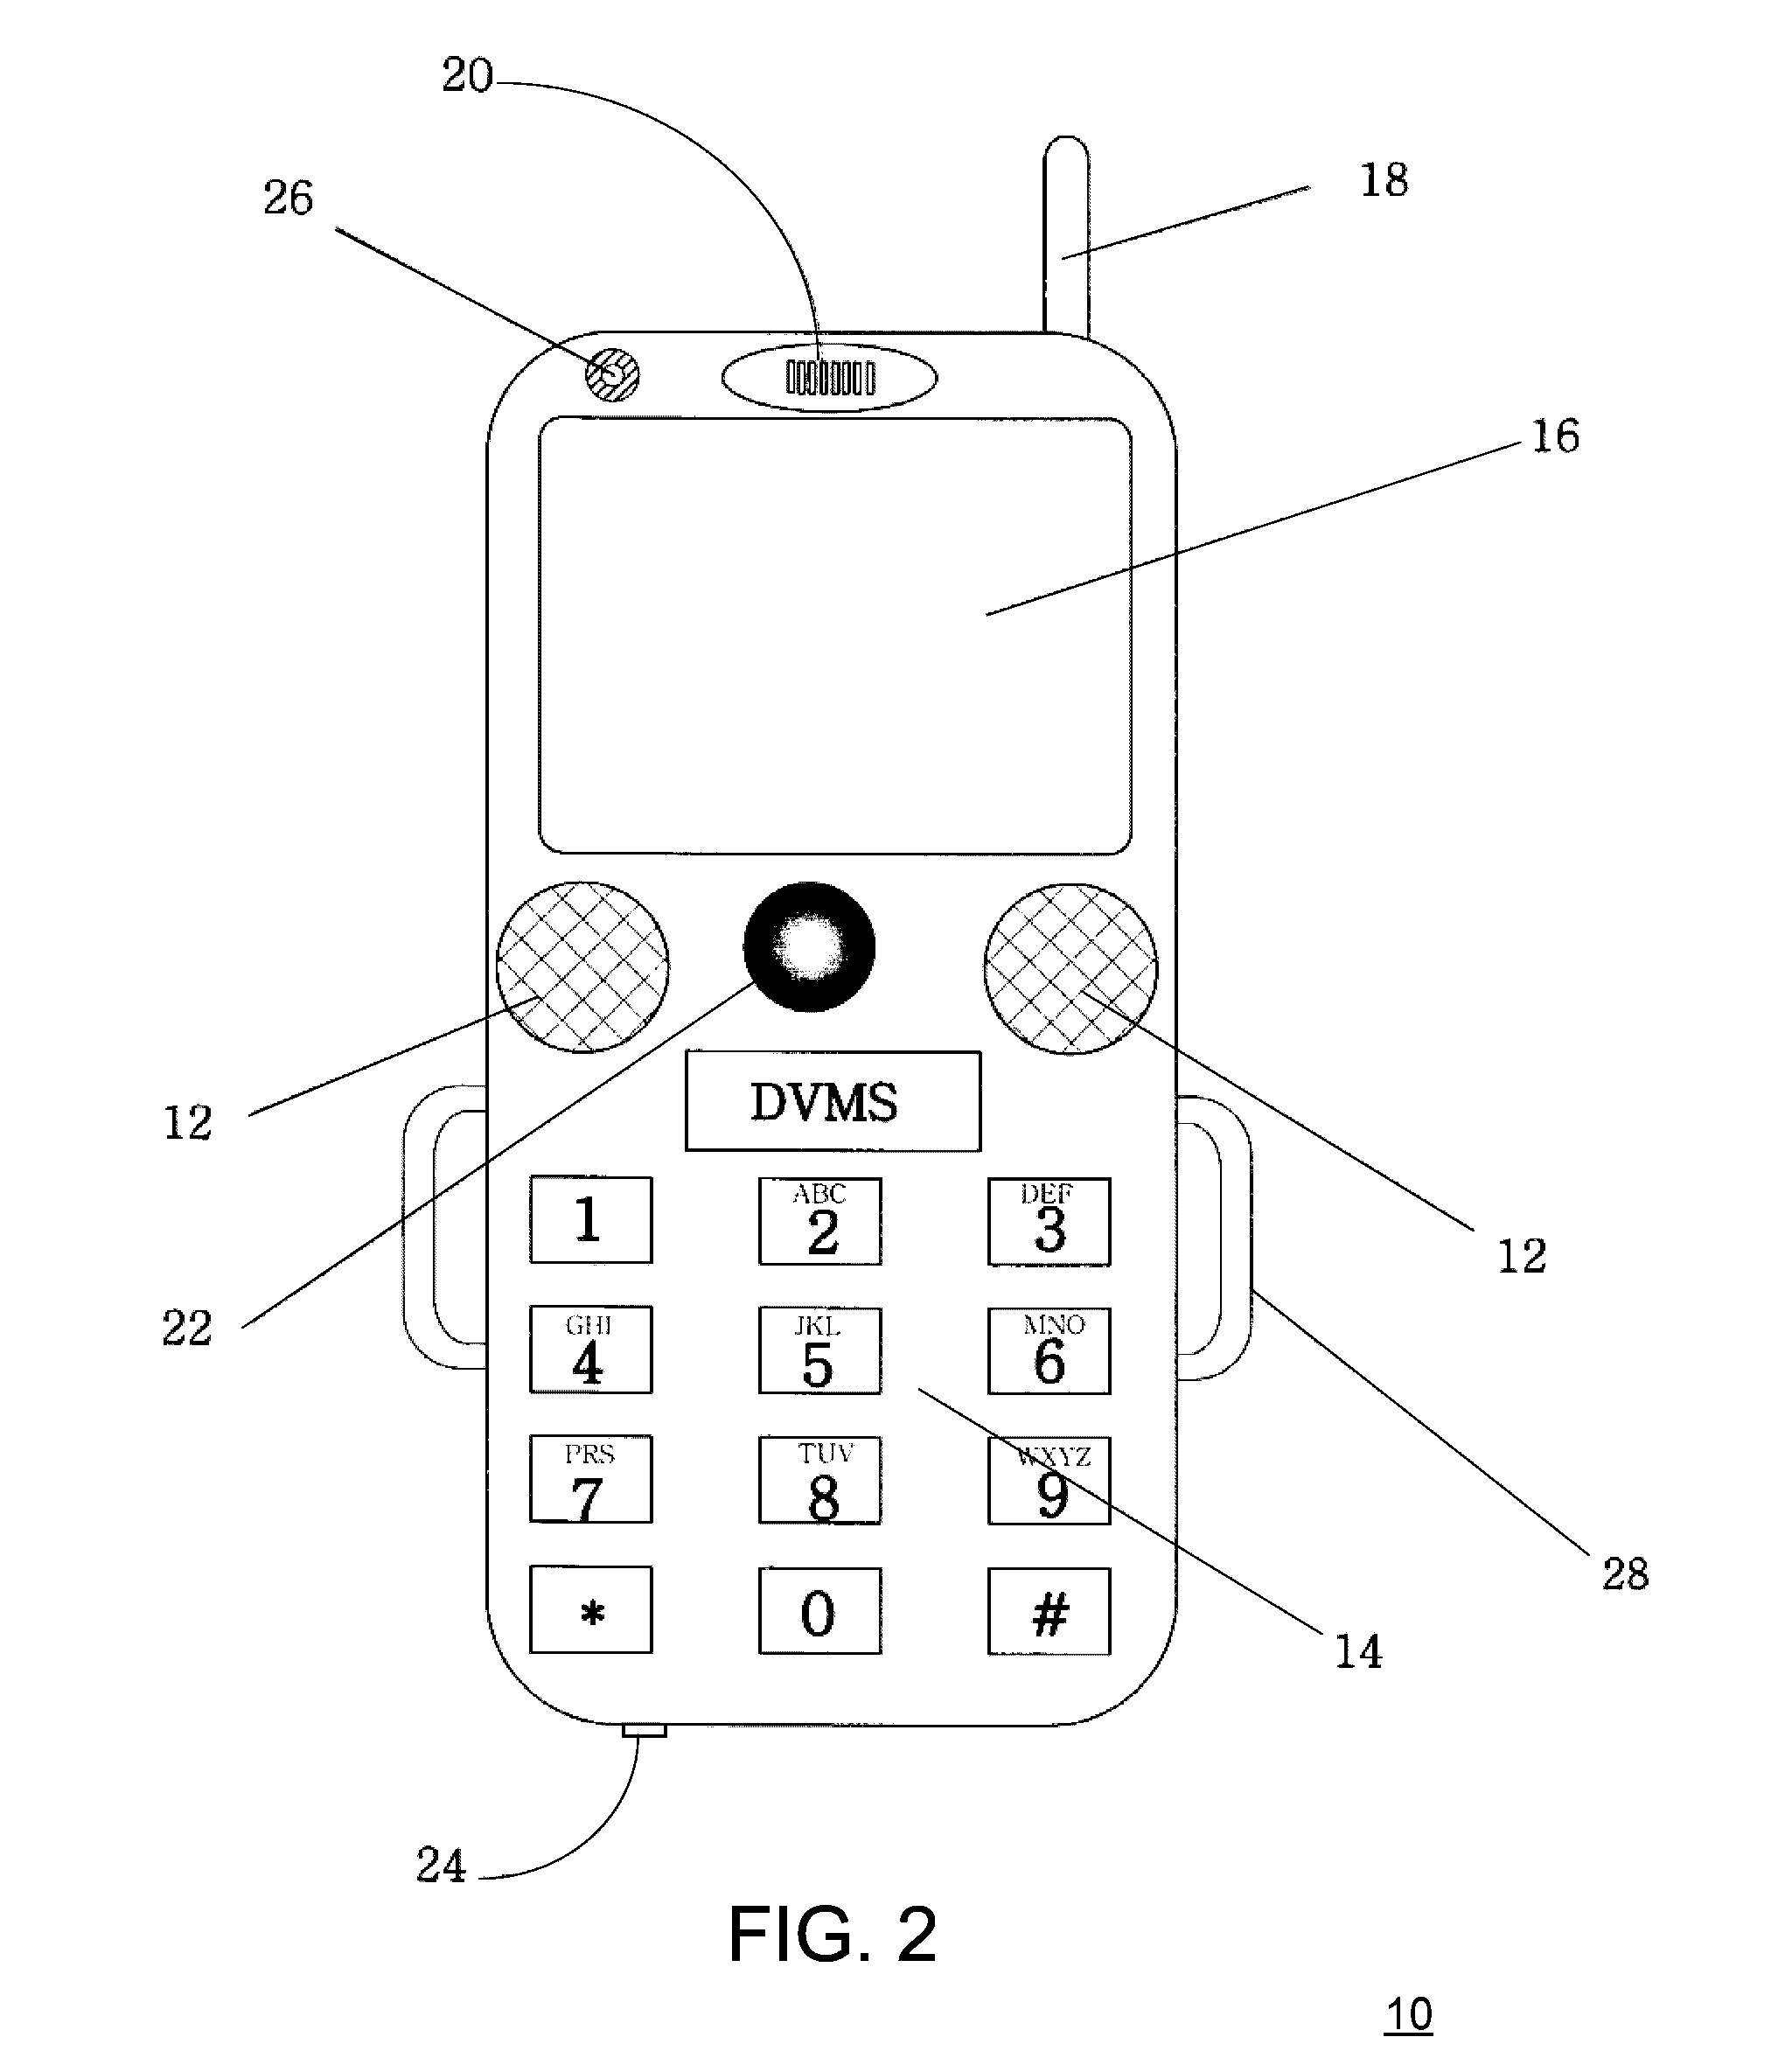 Video communication method for receiving person at entrance